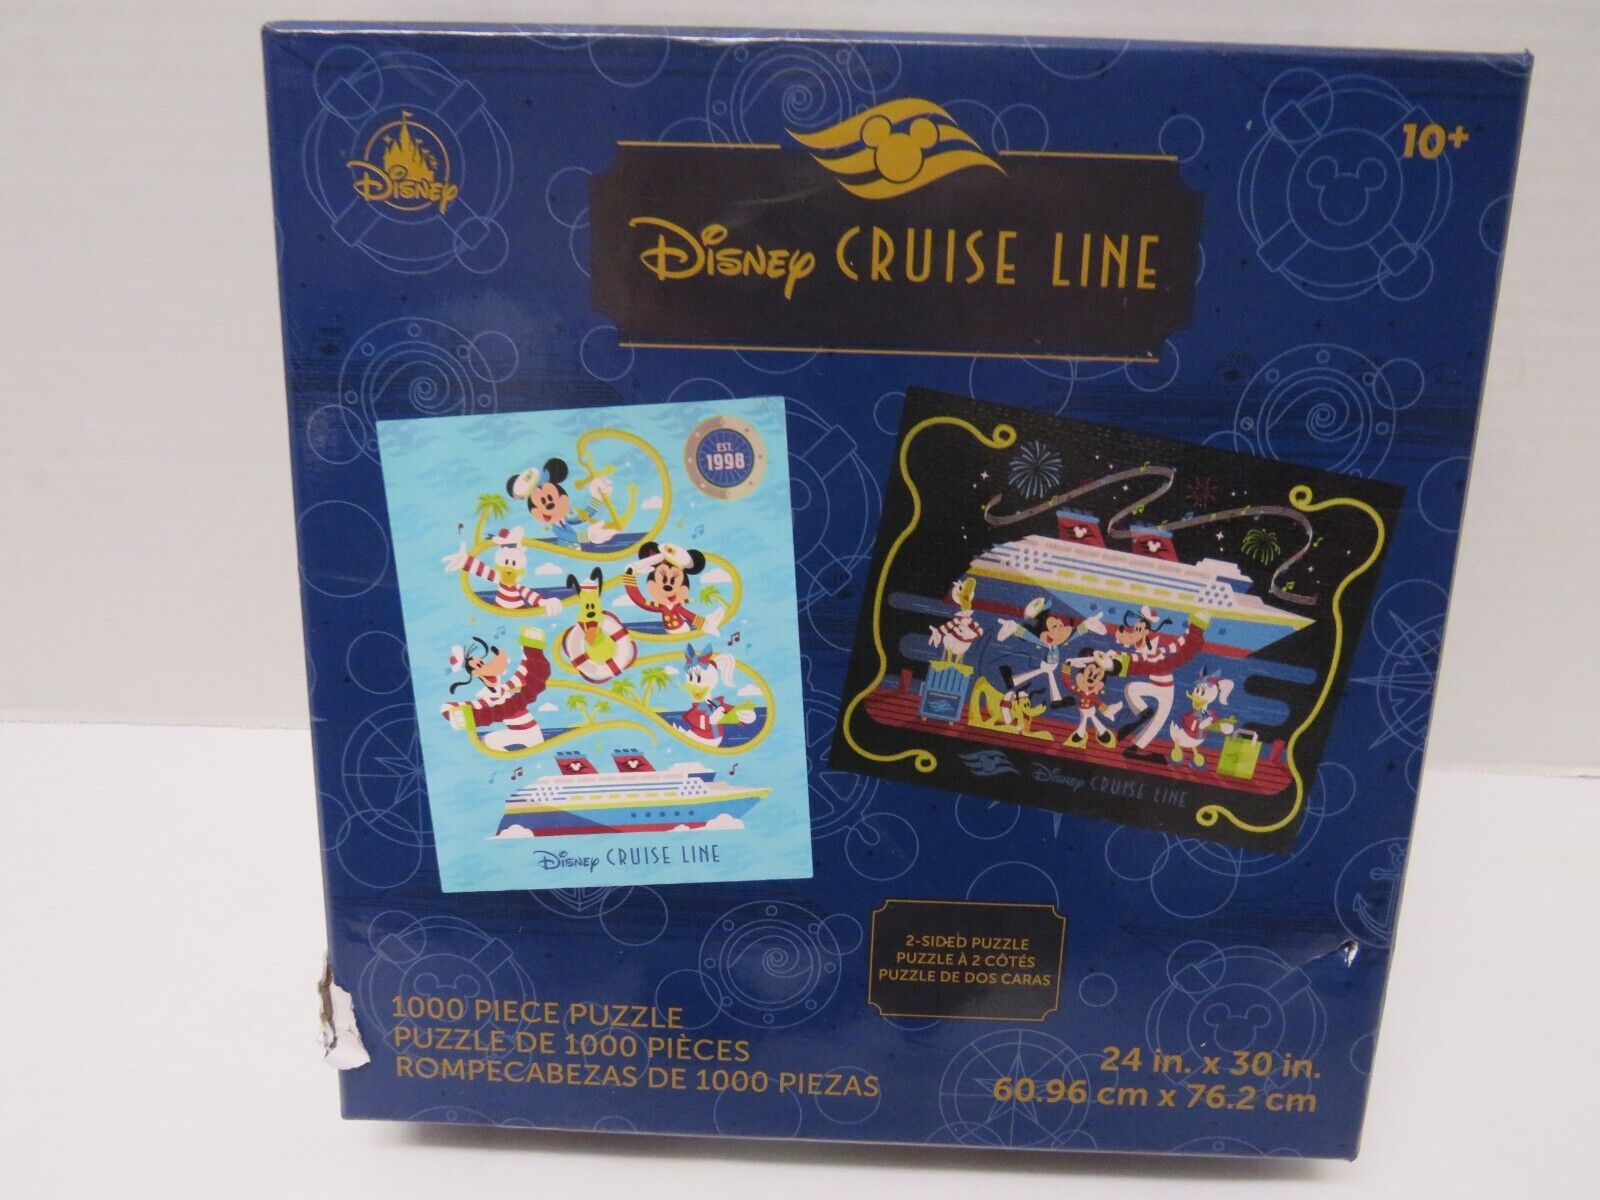 NIP DISNEY CRUISE LINE 1000 Pc 2 Sided Puzzle Mickey Mouse and Friends